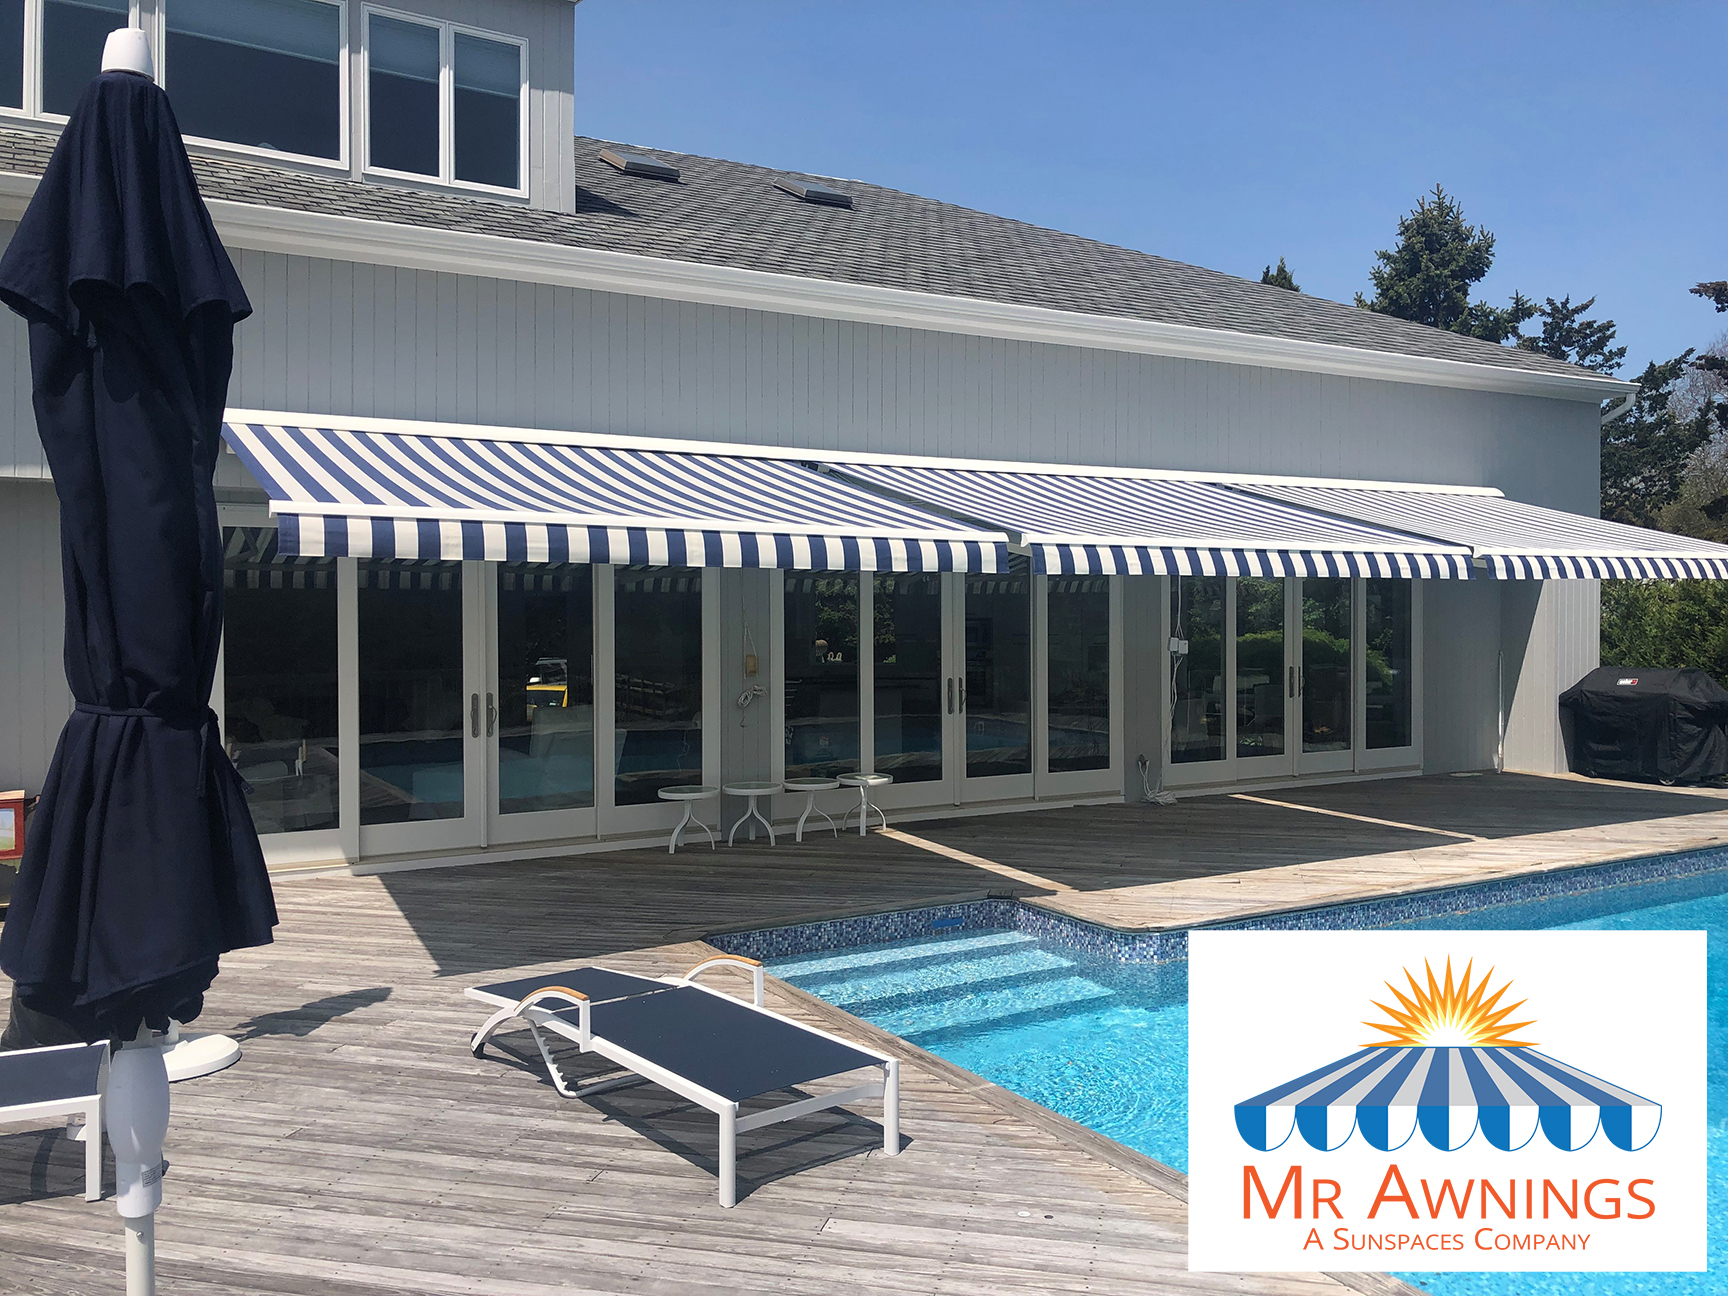 Sunesta retractable awnings from Mr Awning